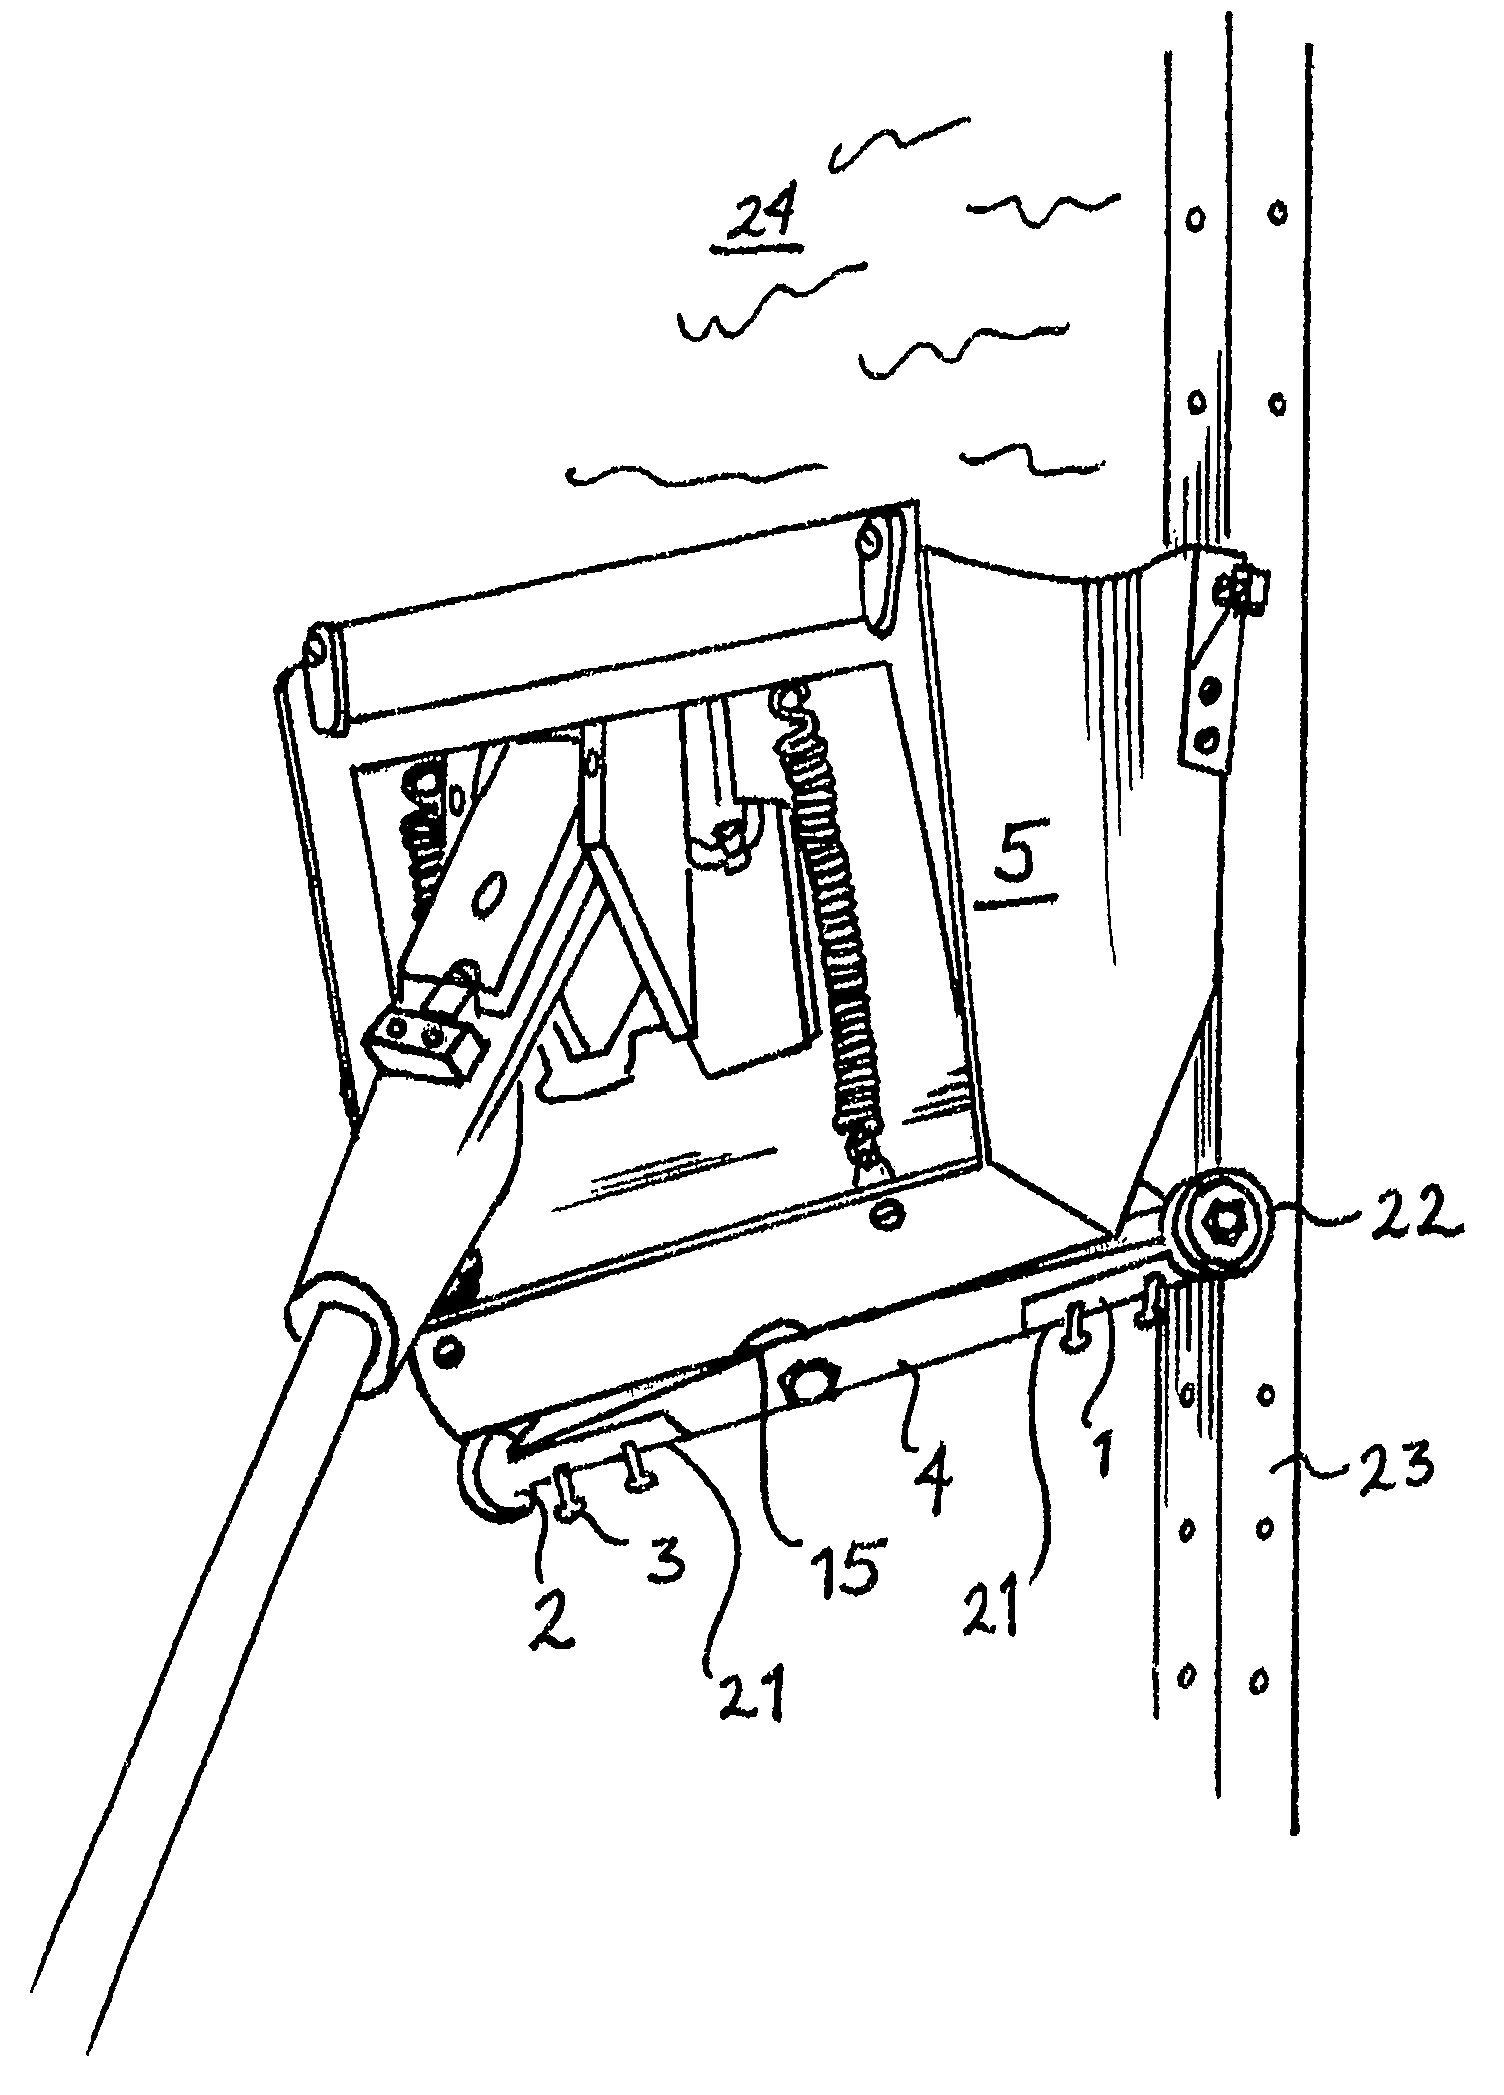 Axle guide assembly for drywall coating box